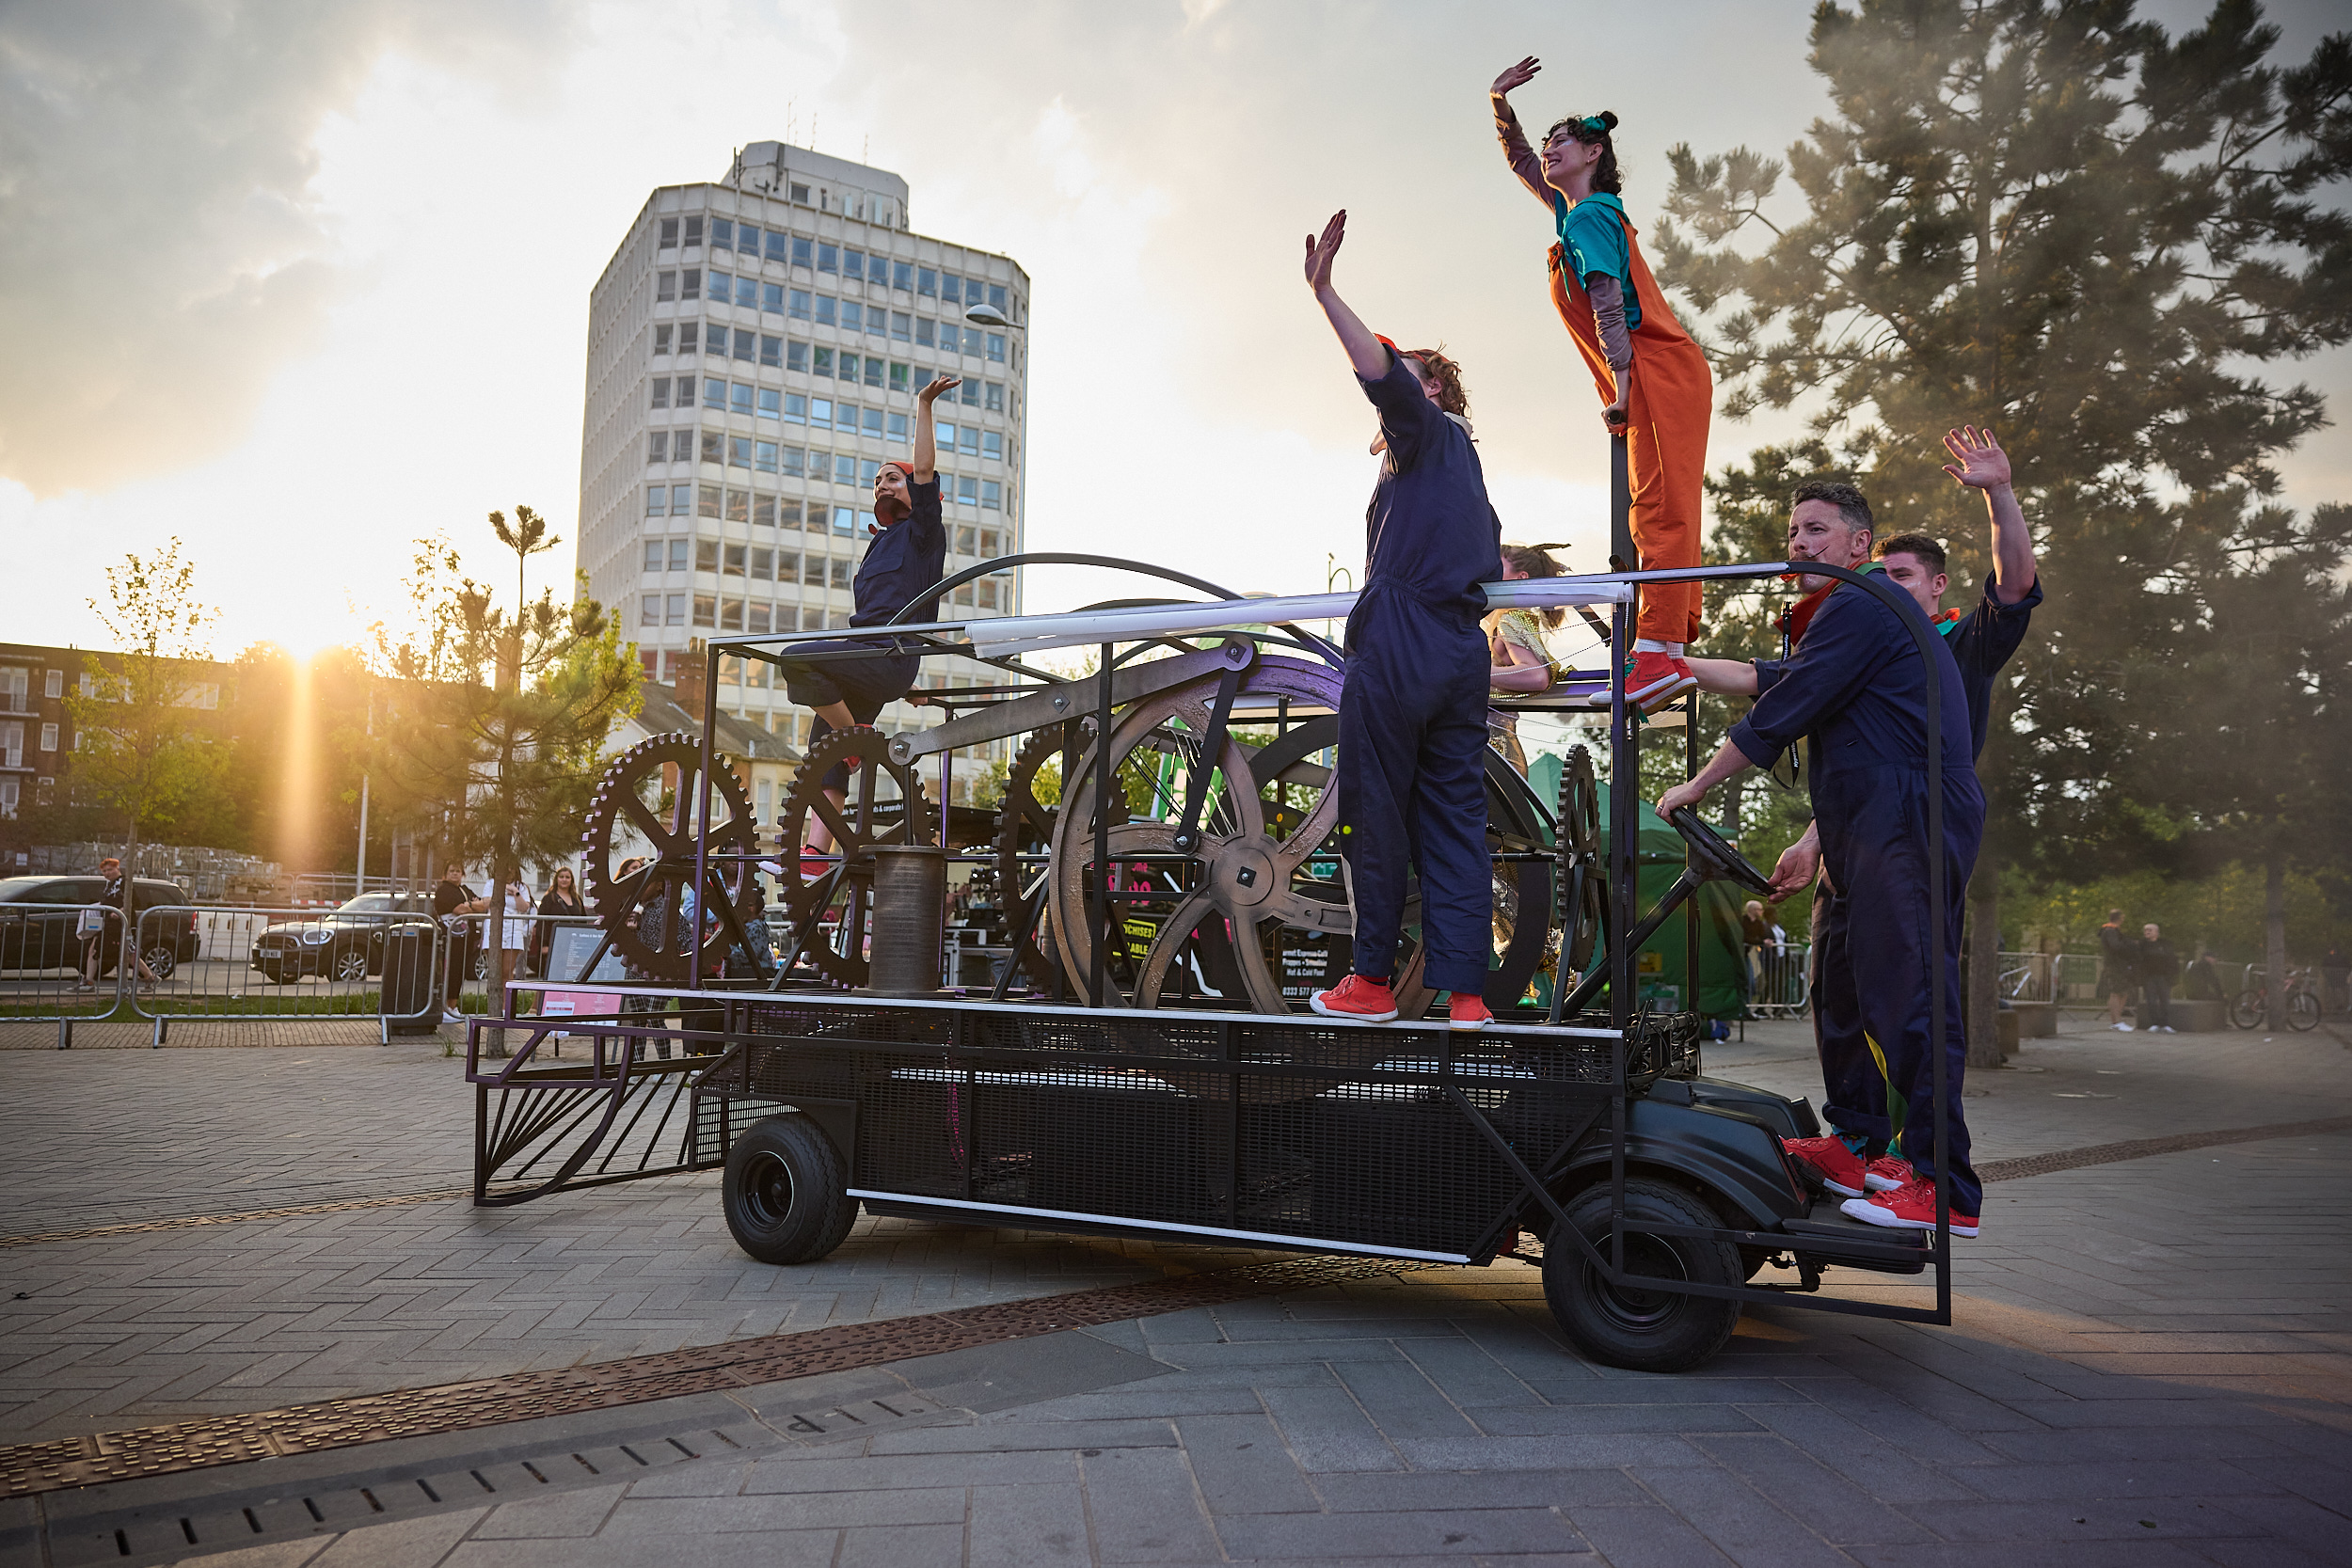 Performers balance on a golf cart turned into a train, waving at the crowds.